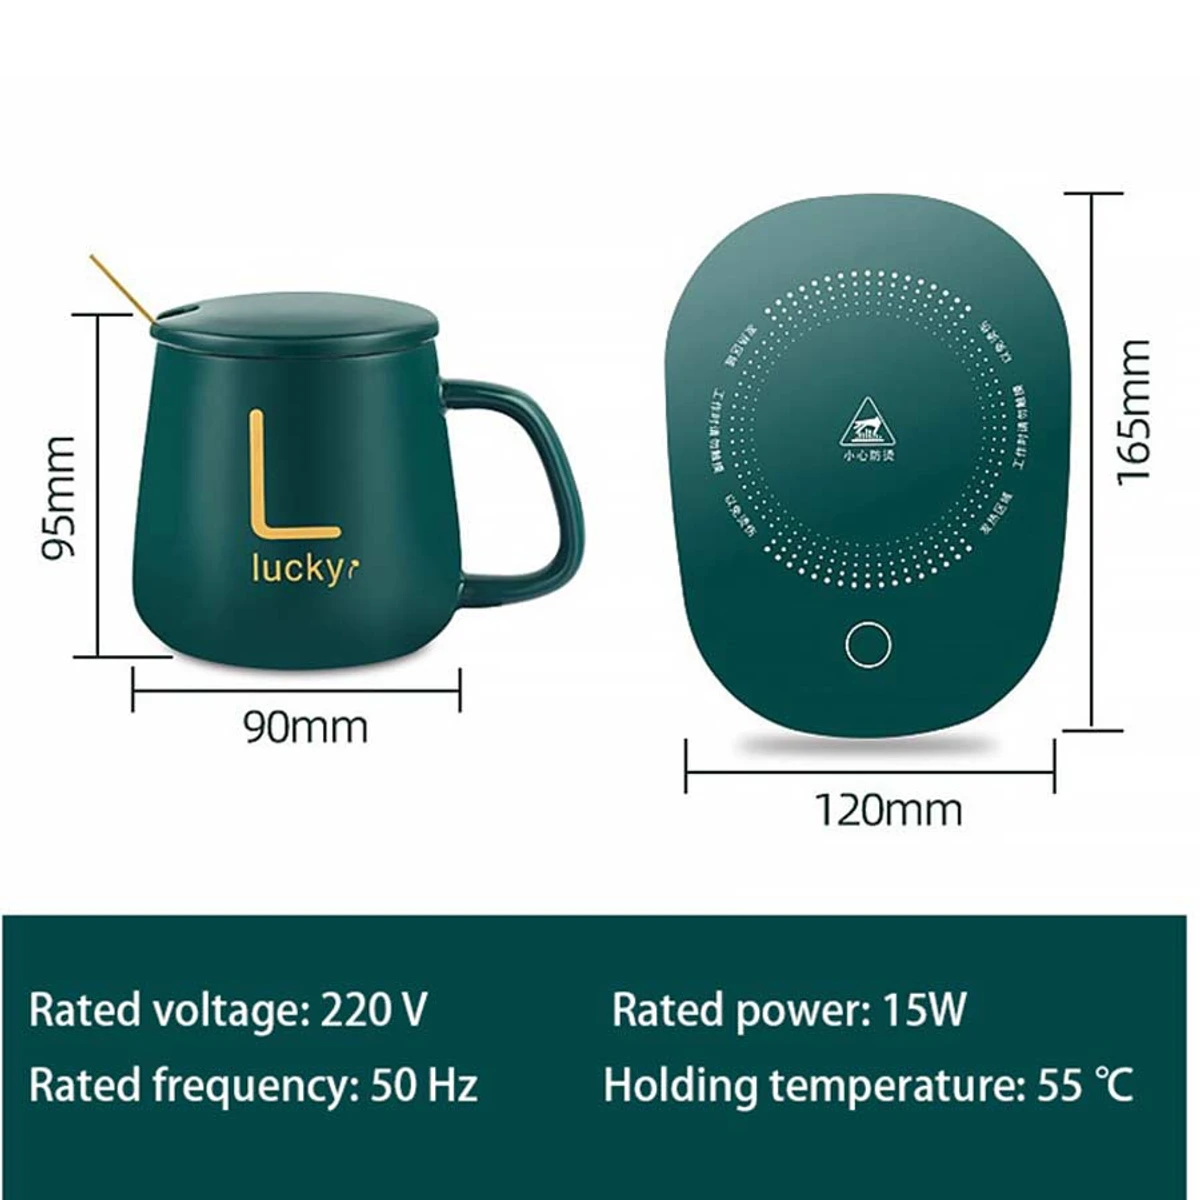 Sweet Life 55 degree constant ceramic Coffee cup / mug with Heating Pad Set